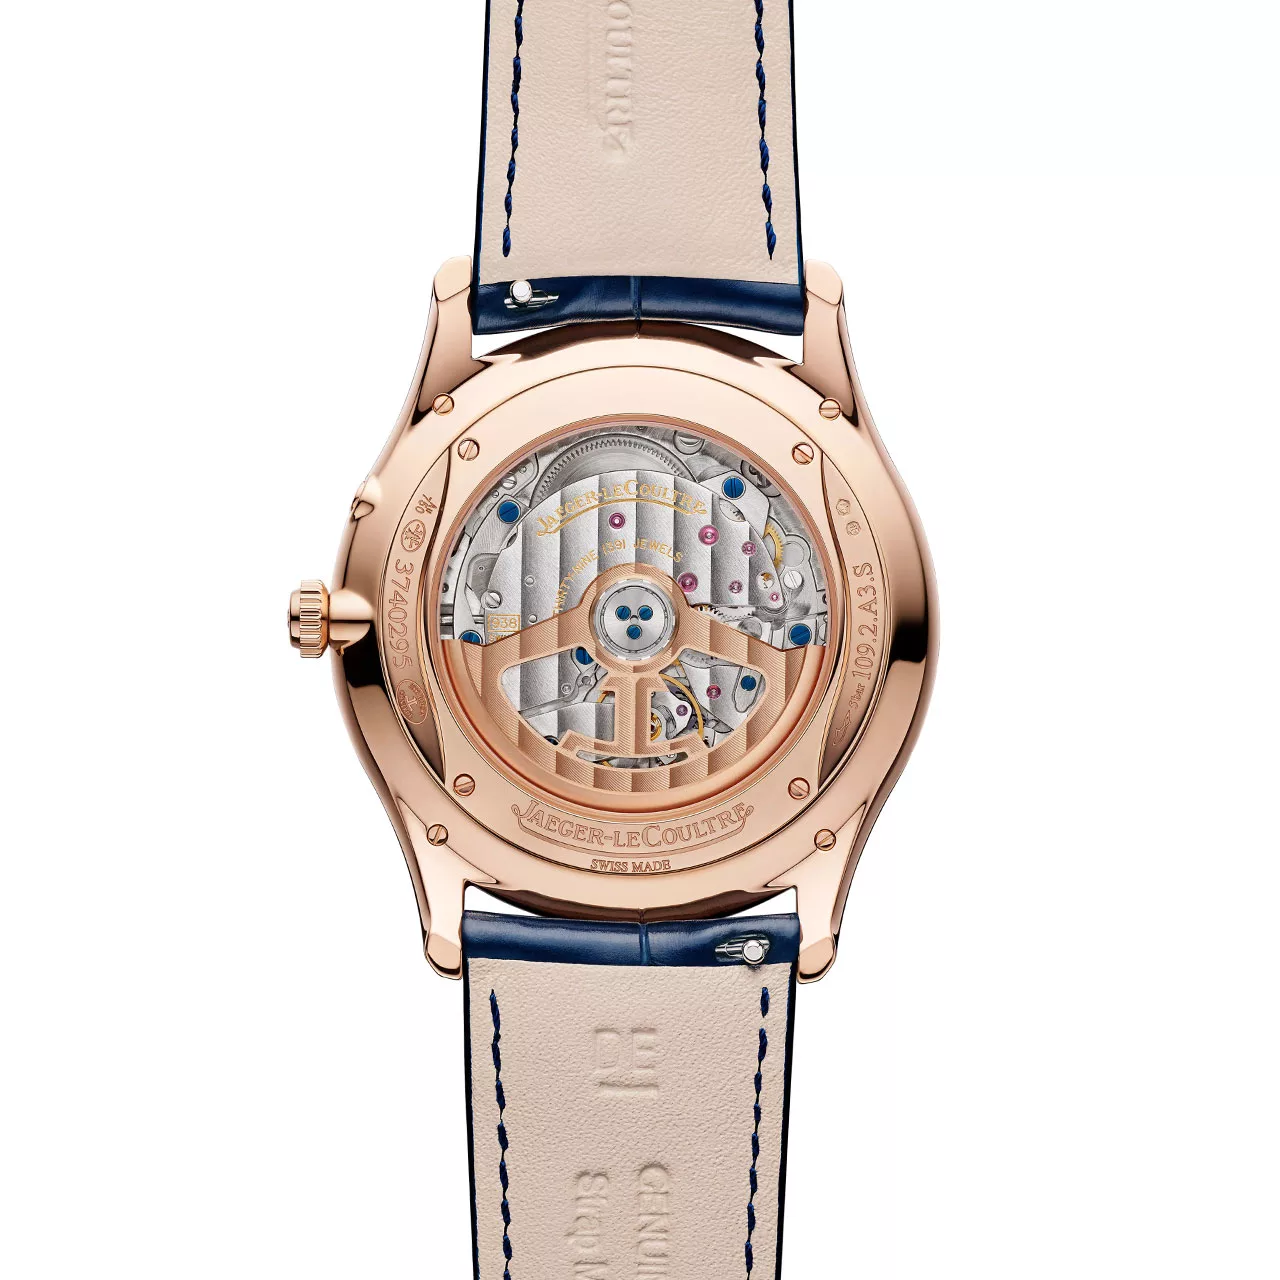 Introducing The Jaeger-LeCoultre Master Ultra Thin Power Reserve Watch ...